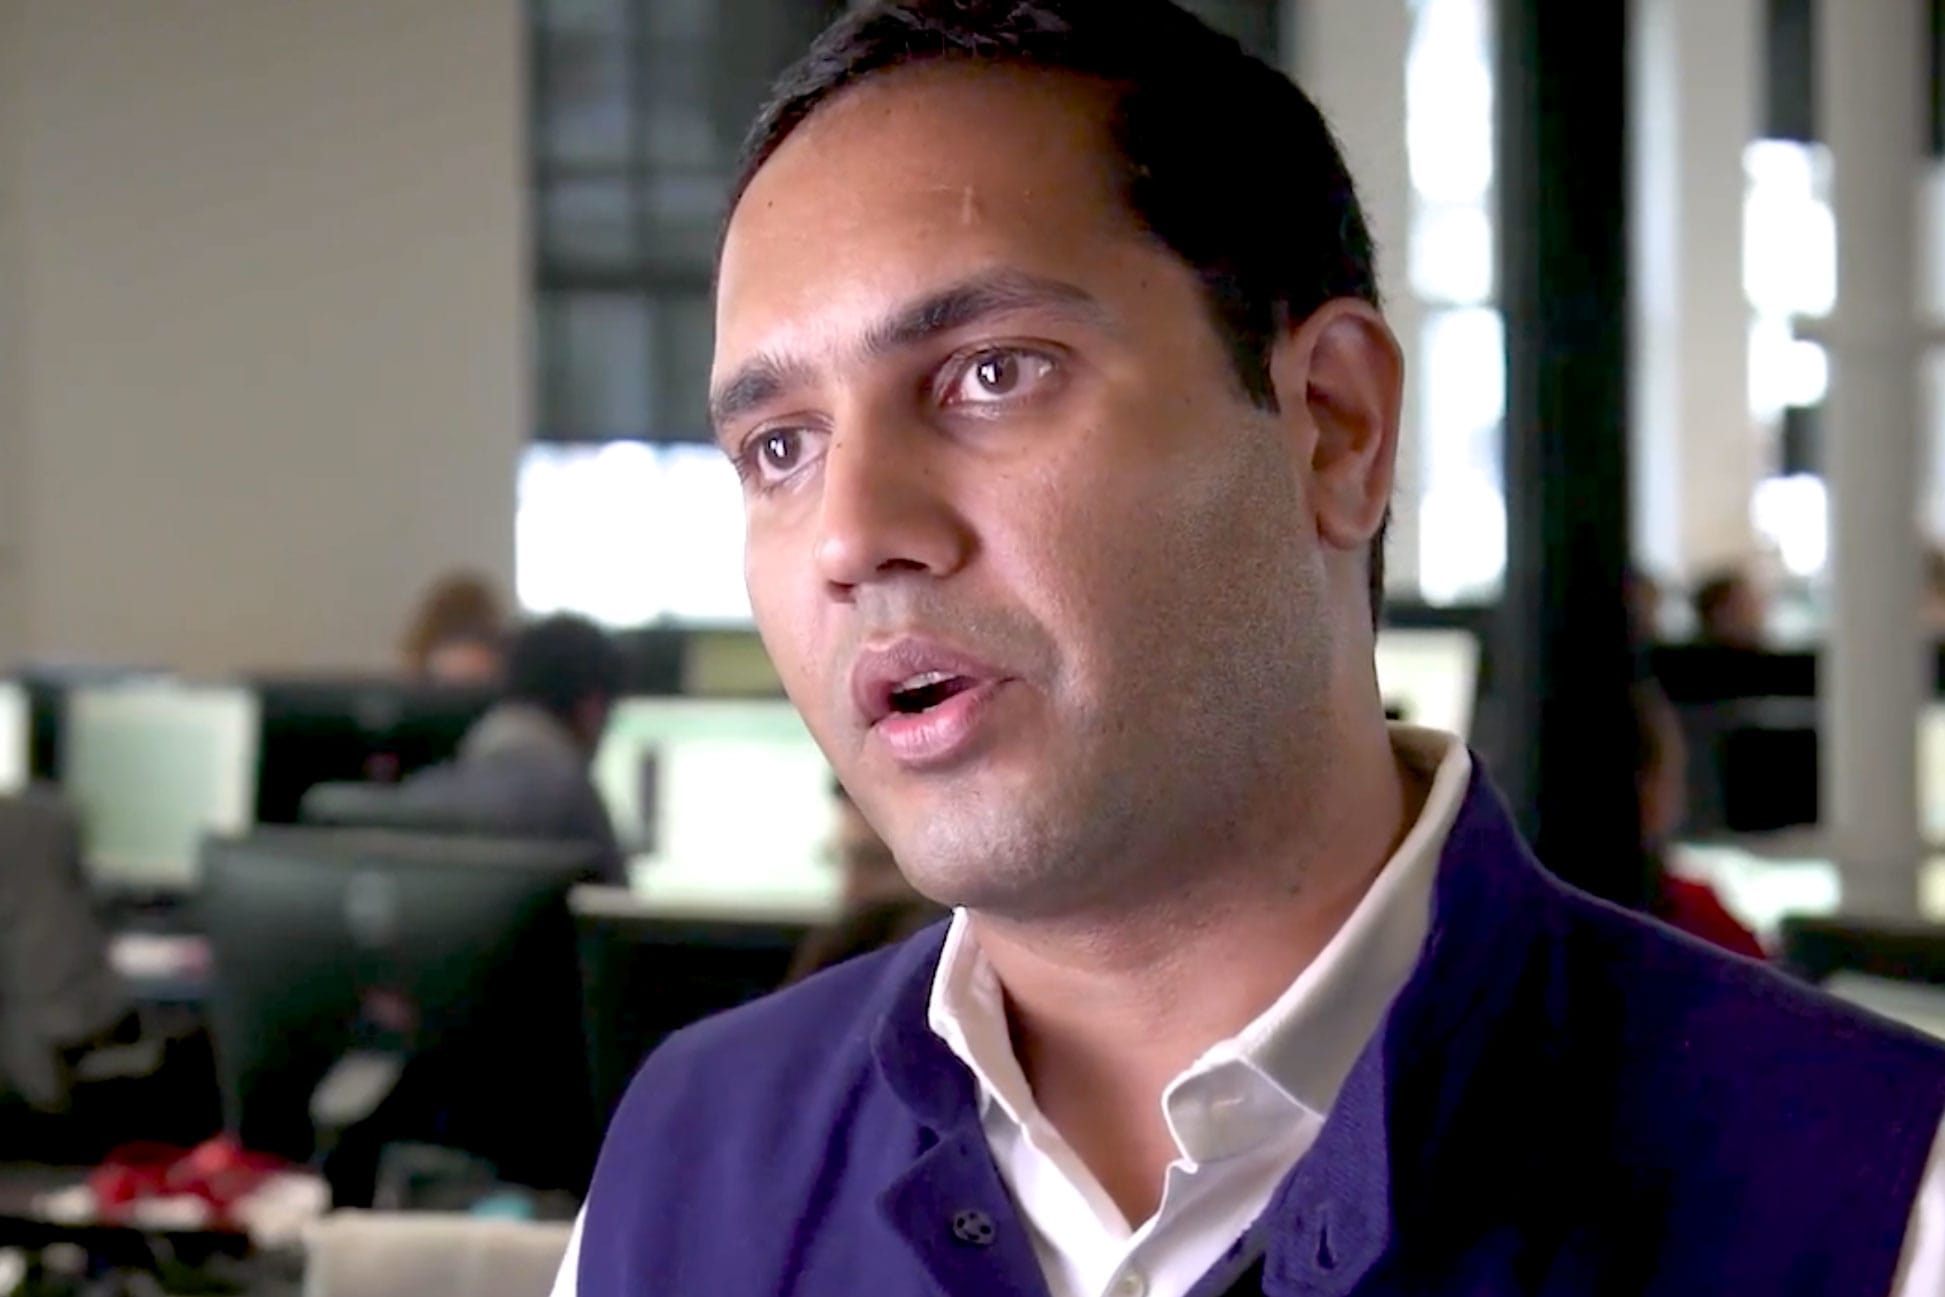 Better founder Vishal Garg, who did mass Zoom layoff, returns as CEO - CNBC : Garg cited market efficiency, performance and productivity as the reason behind the firings.  | Tranquility 國際社群